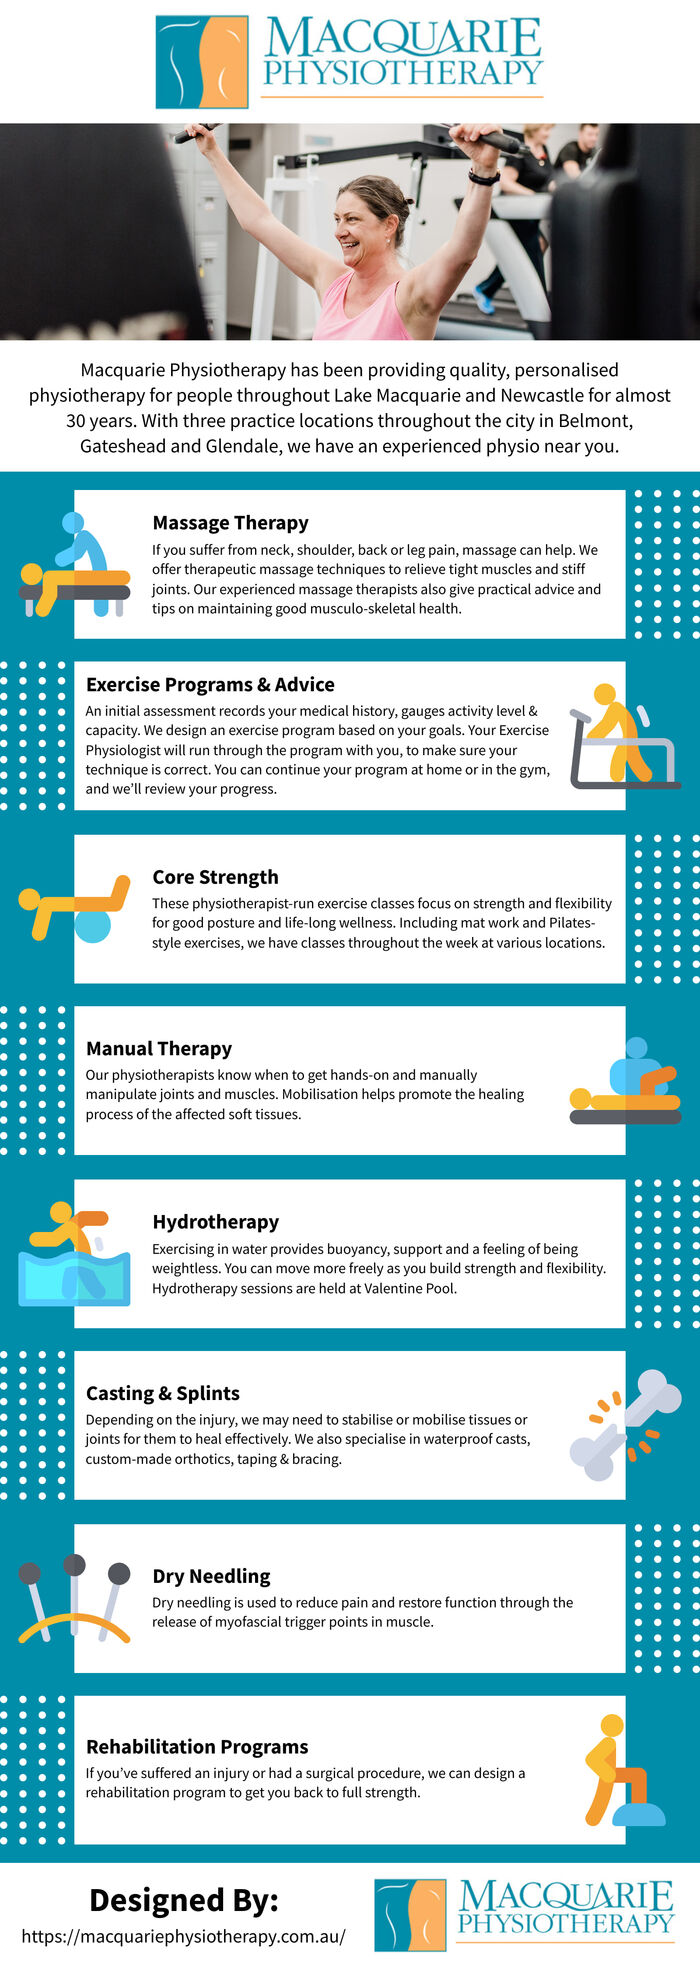 This Infographic is designed by Macquarie Physiotherapy